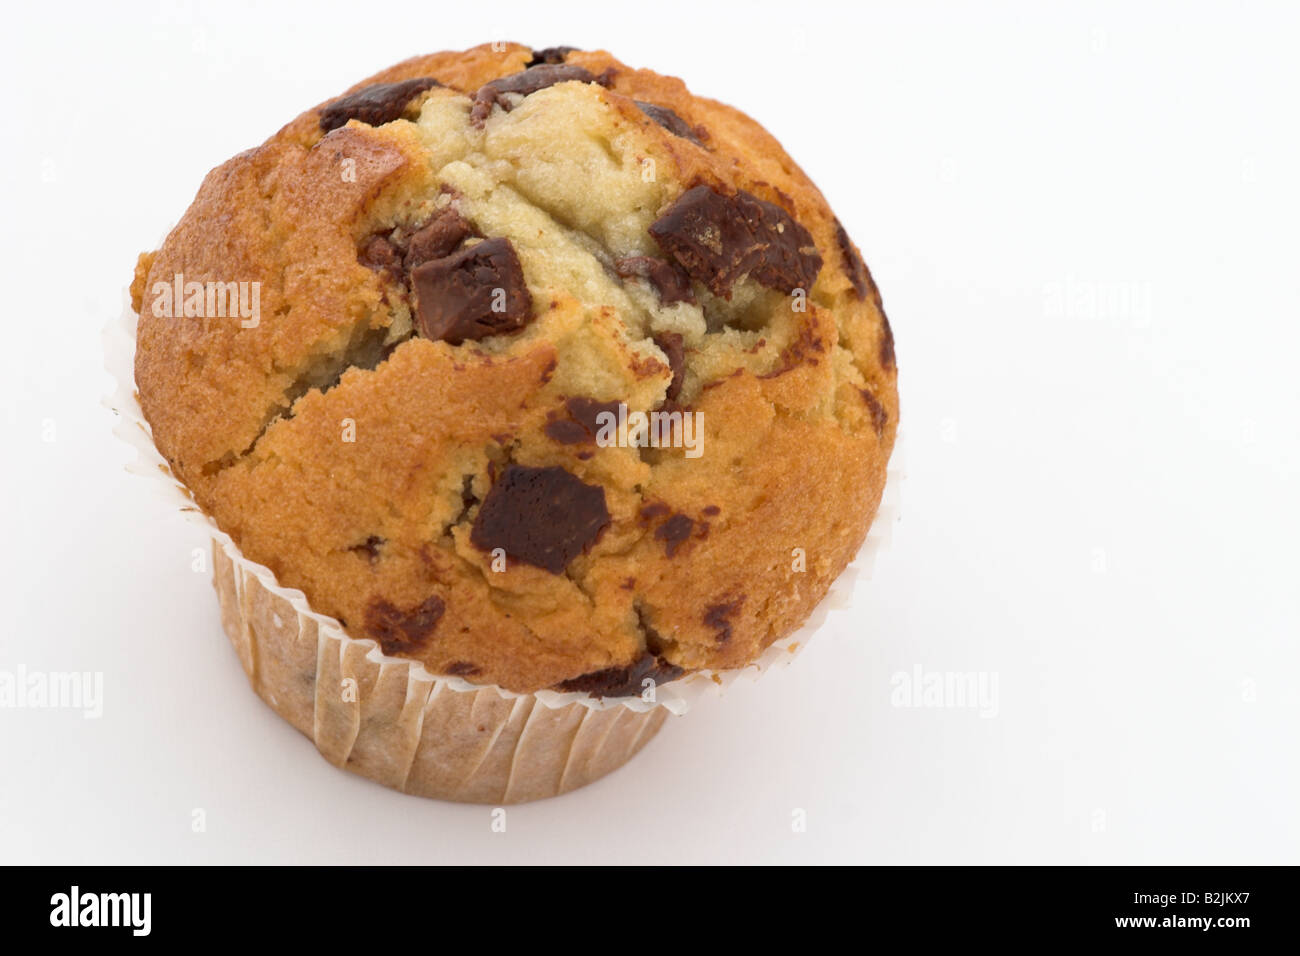 Close up of a single Chocolate Chip Muffin against a white background Stock Photo